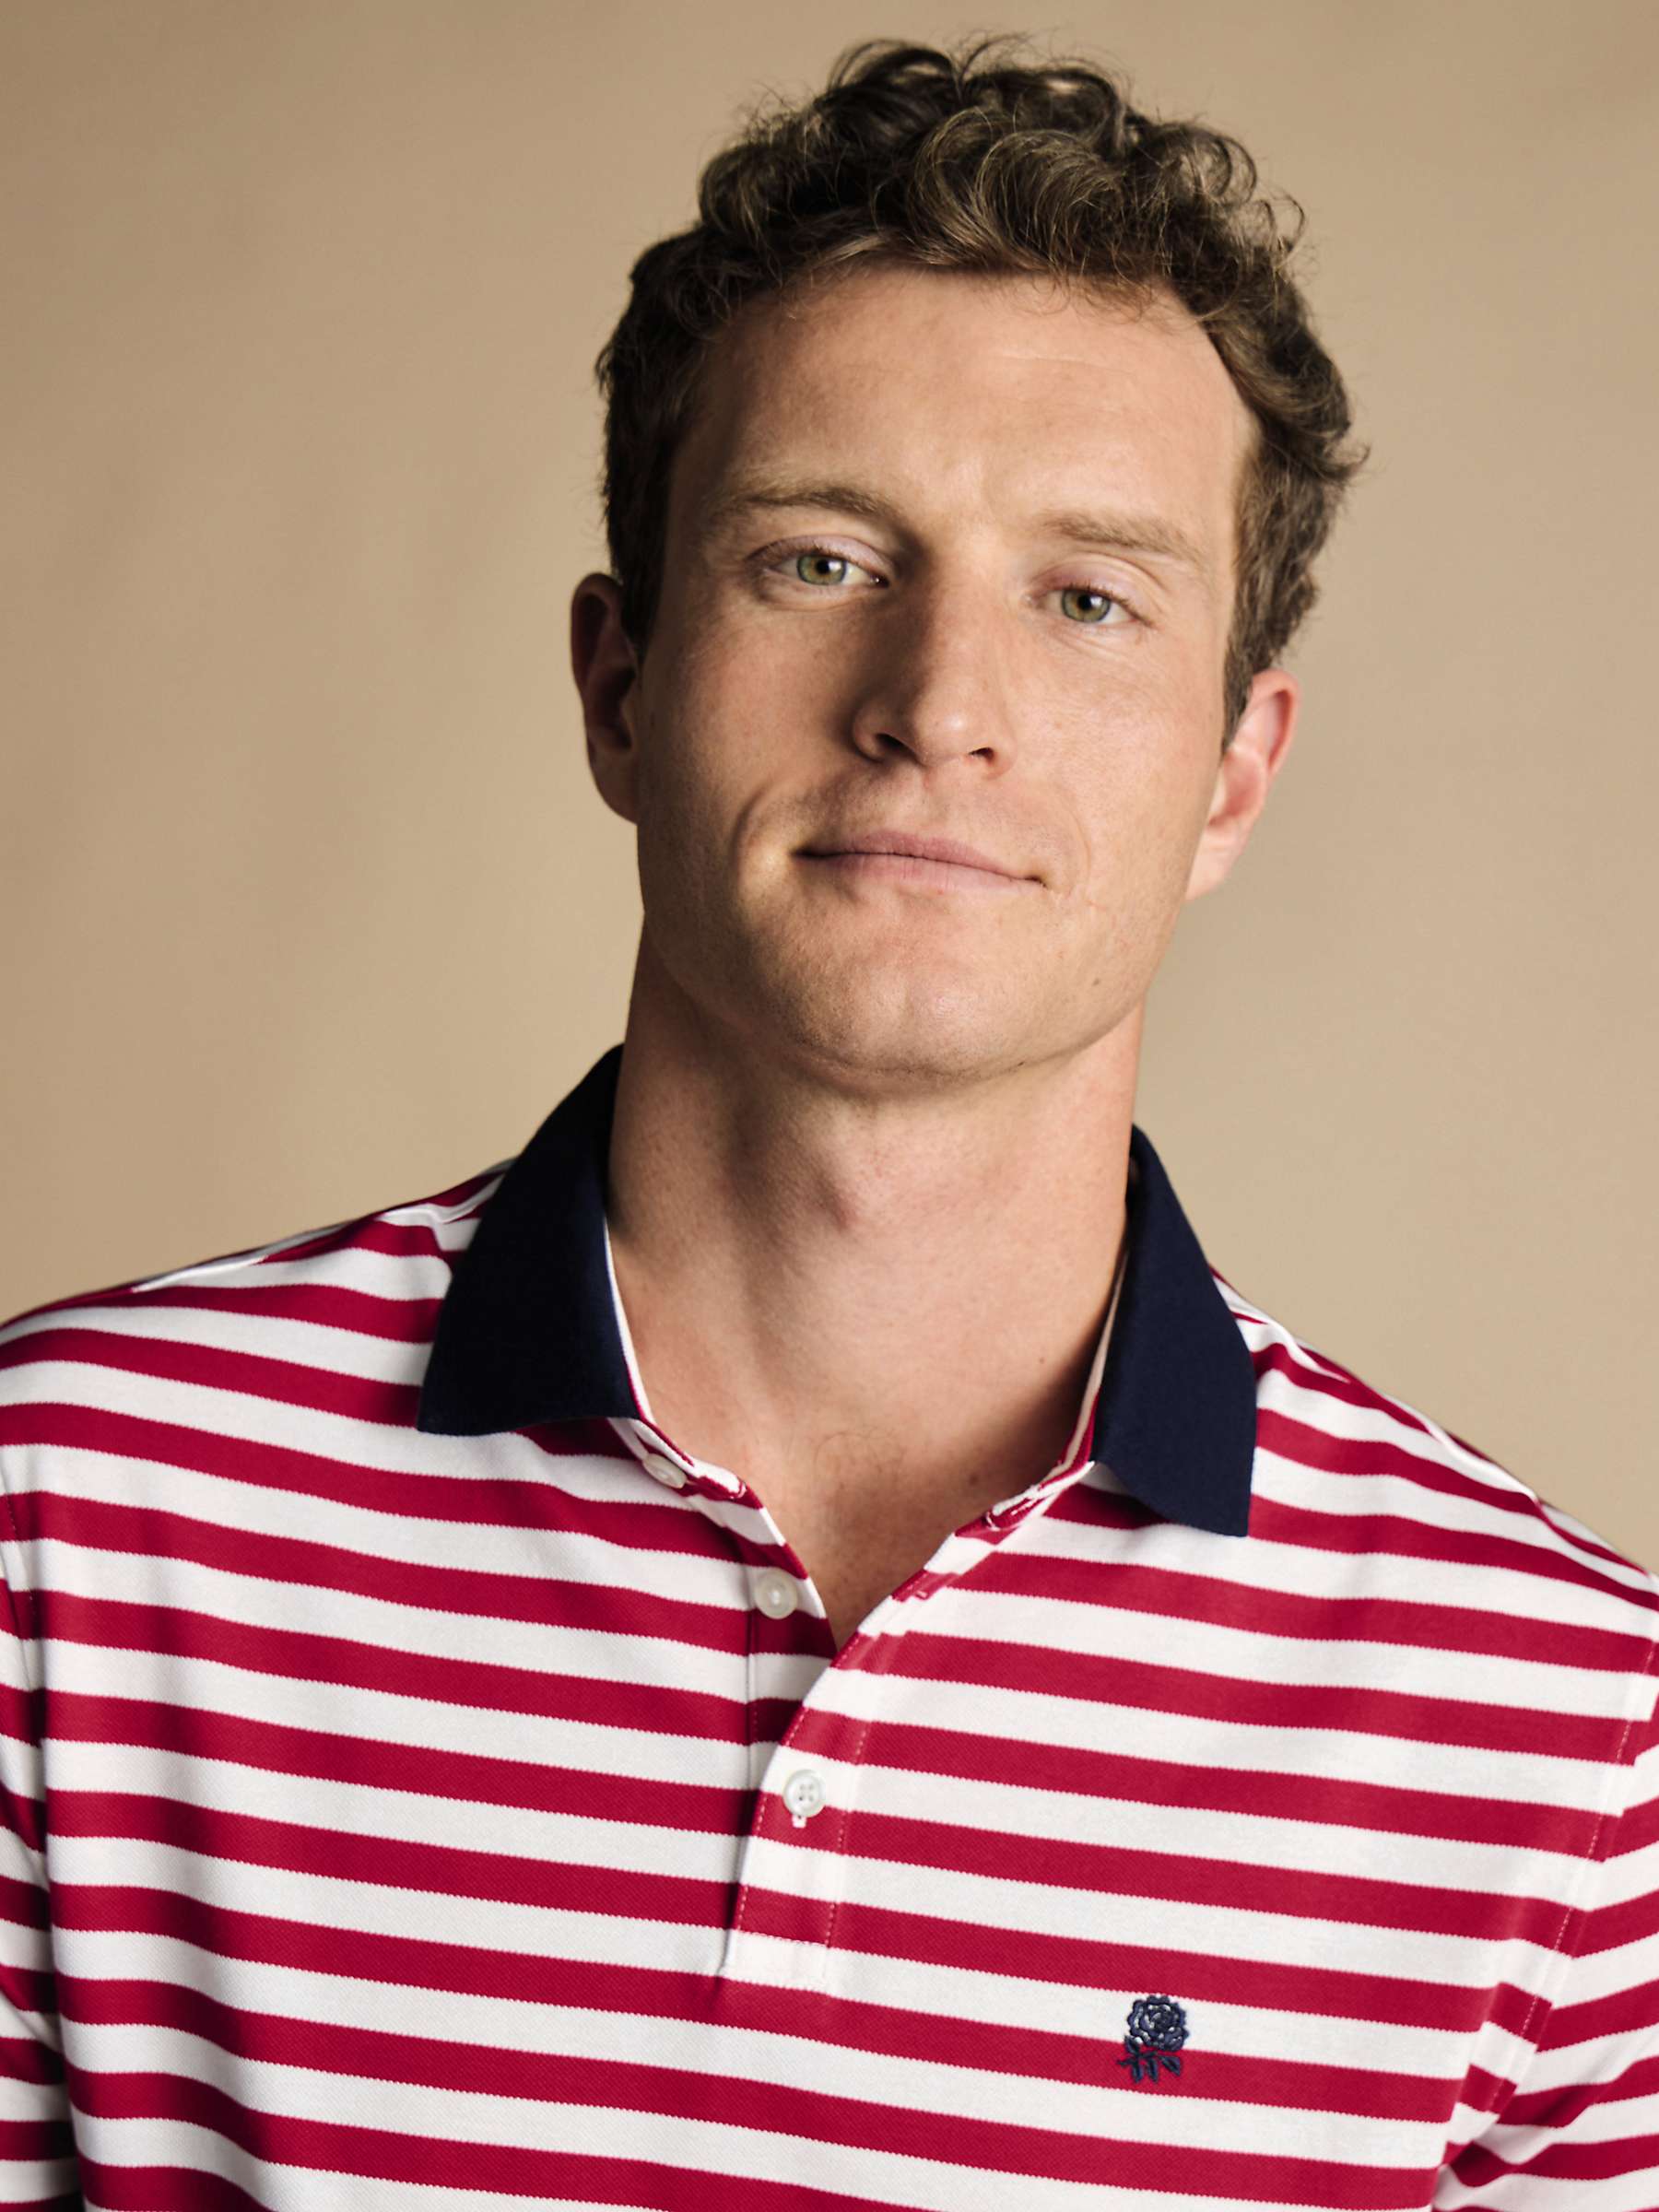 Buy Charles Tyrwhitt England Rugby Stripe Pique Polo Shirt Online at johnlewis.com